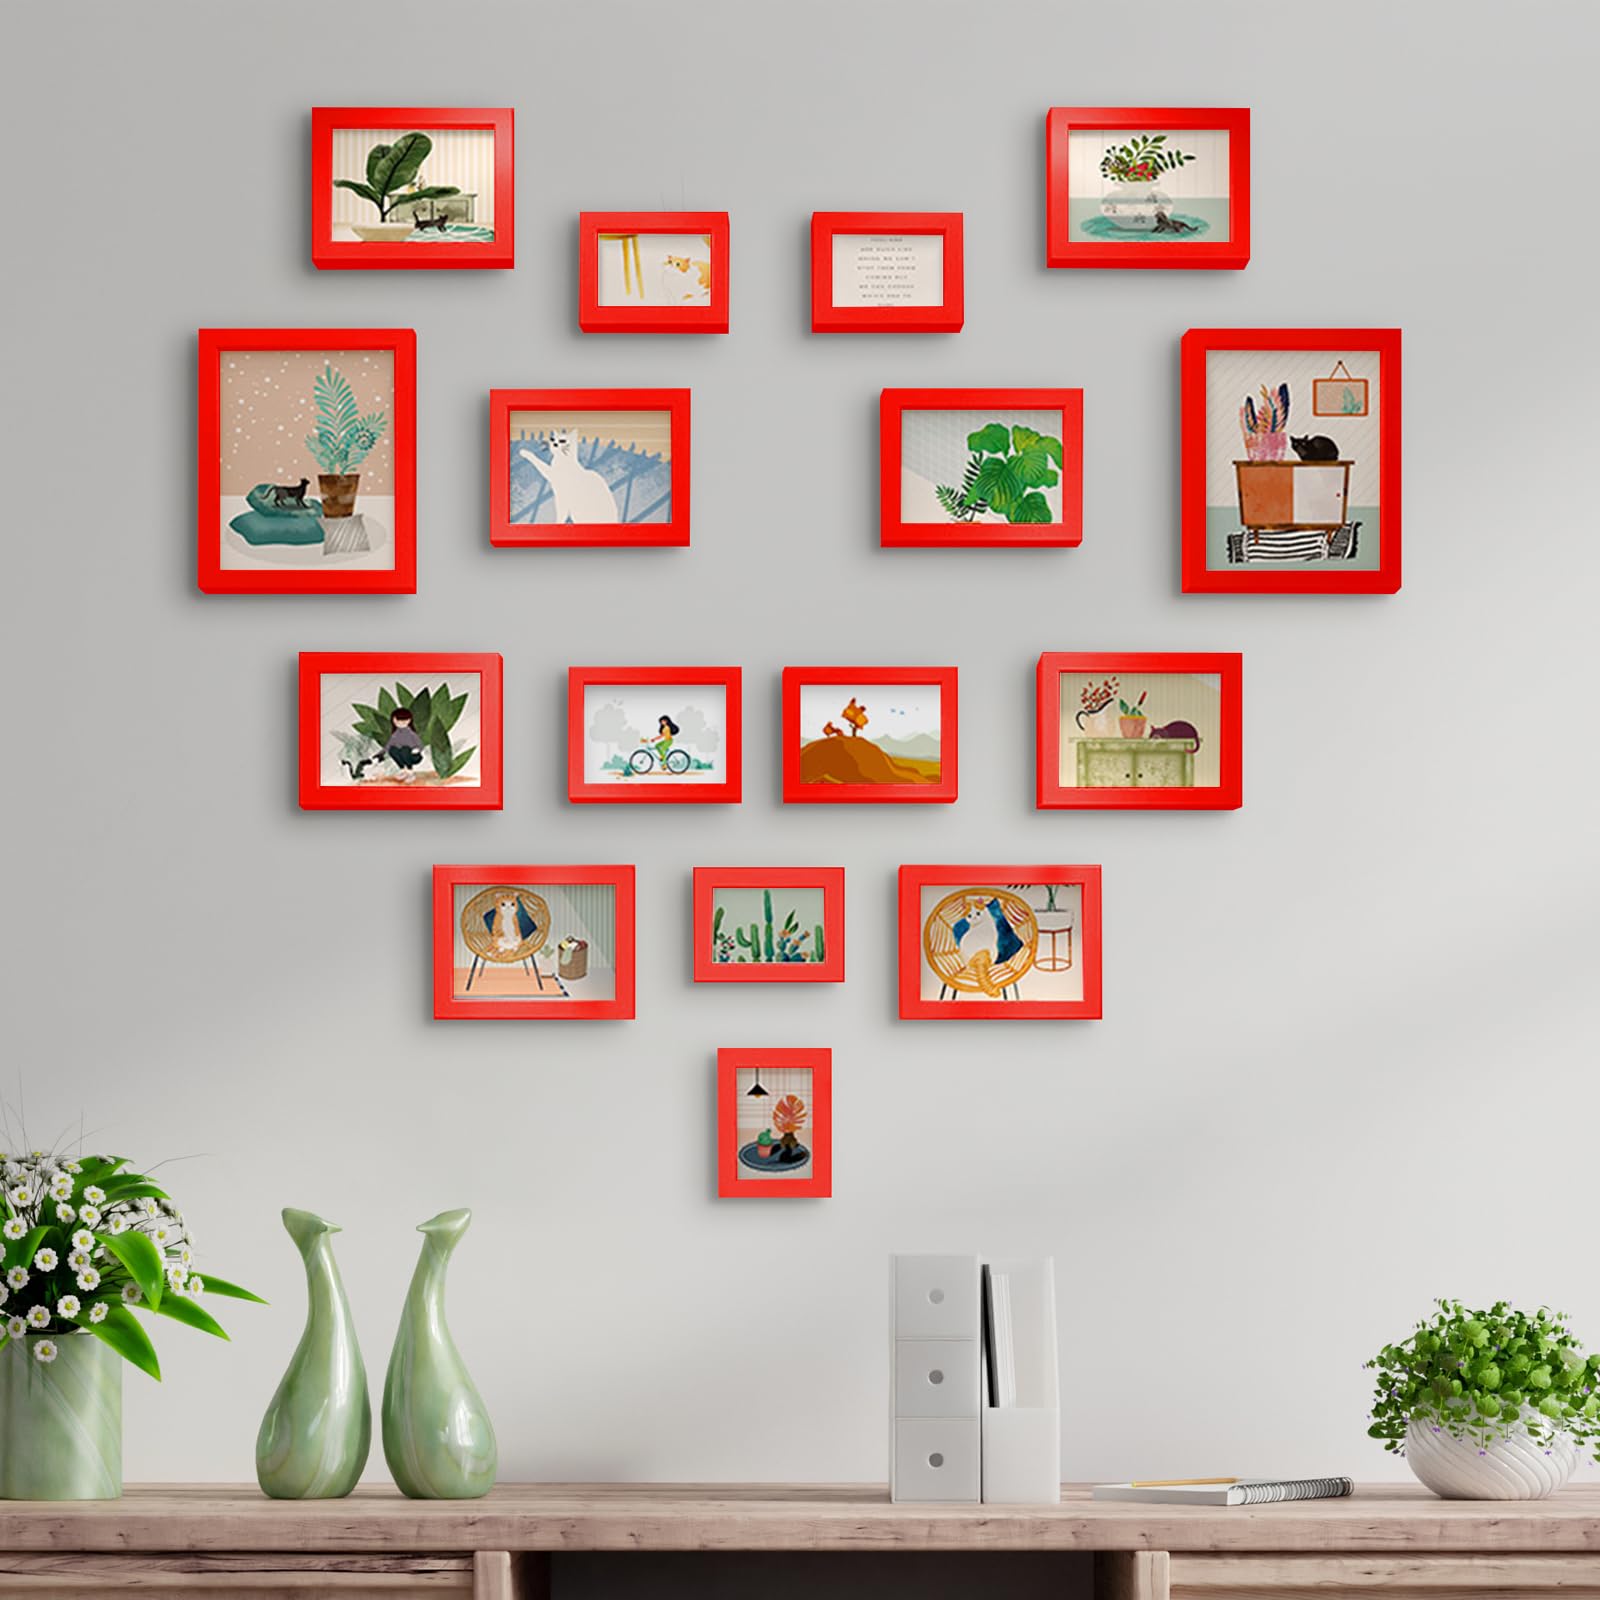 wyooxoo 11x14 Picture Frame Red Solid Wood Photo Frames Display Pictures 8x10 with Mat or 11x14 Without Mat Colorful Frame - Horizontal and Vertical Formats for Wall